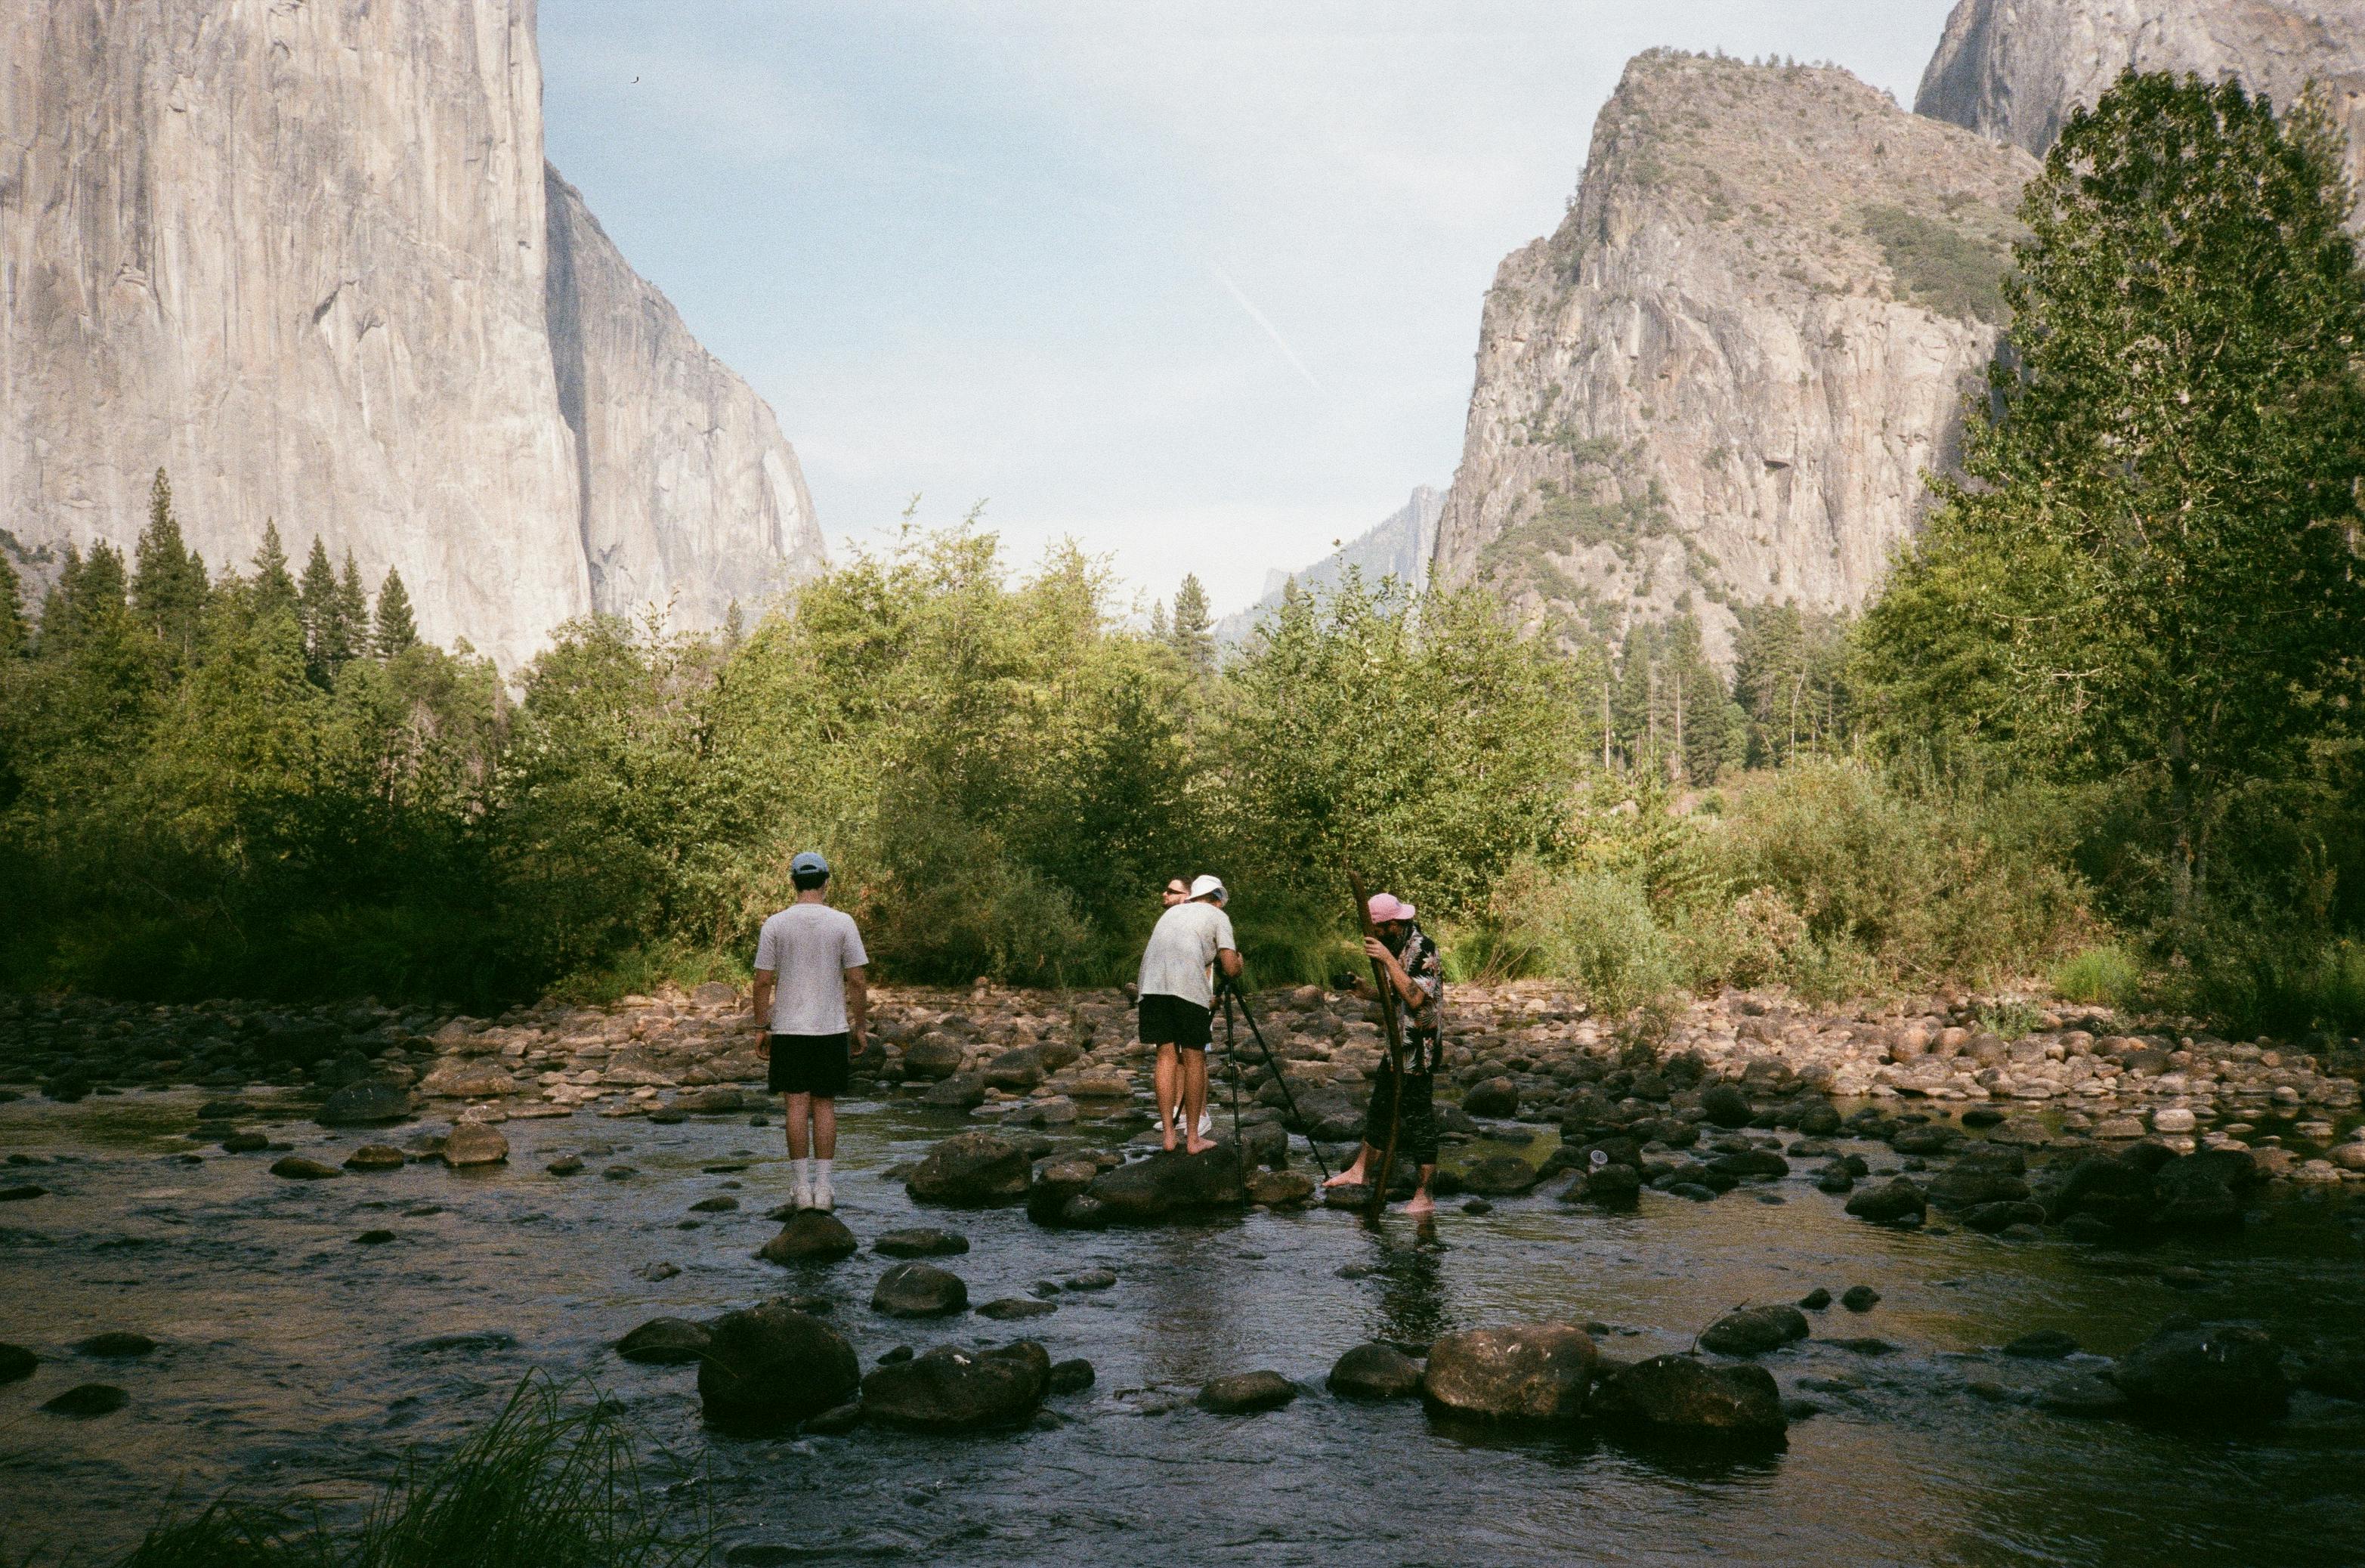 Shooting album artwork with my closest friends in Yosemite National Park